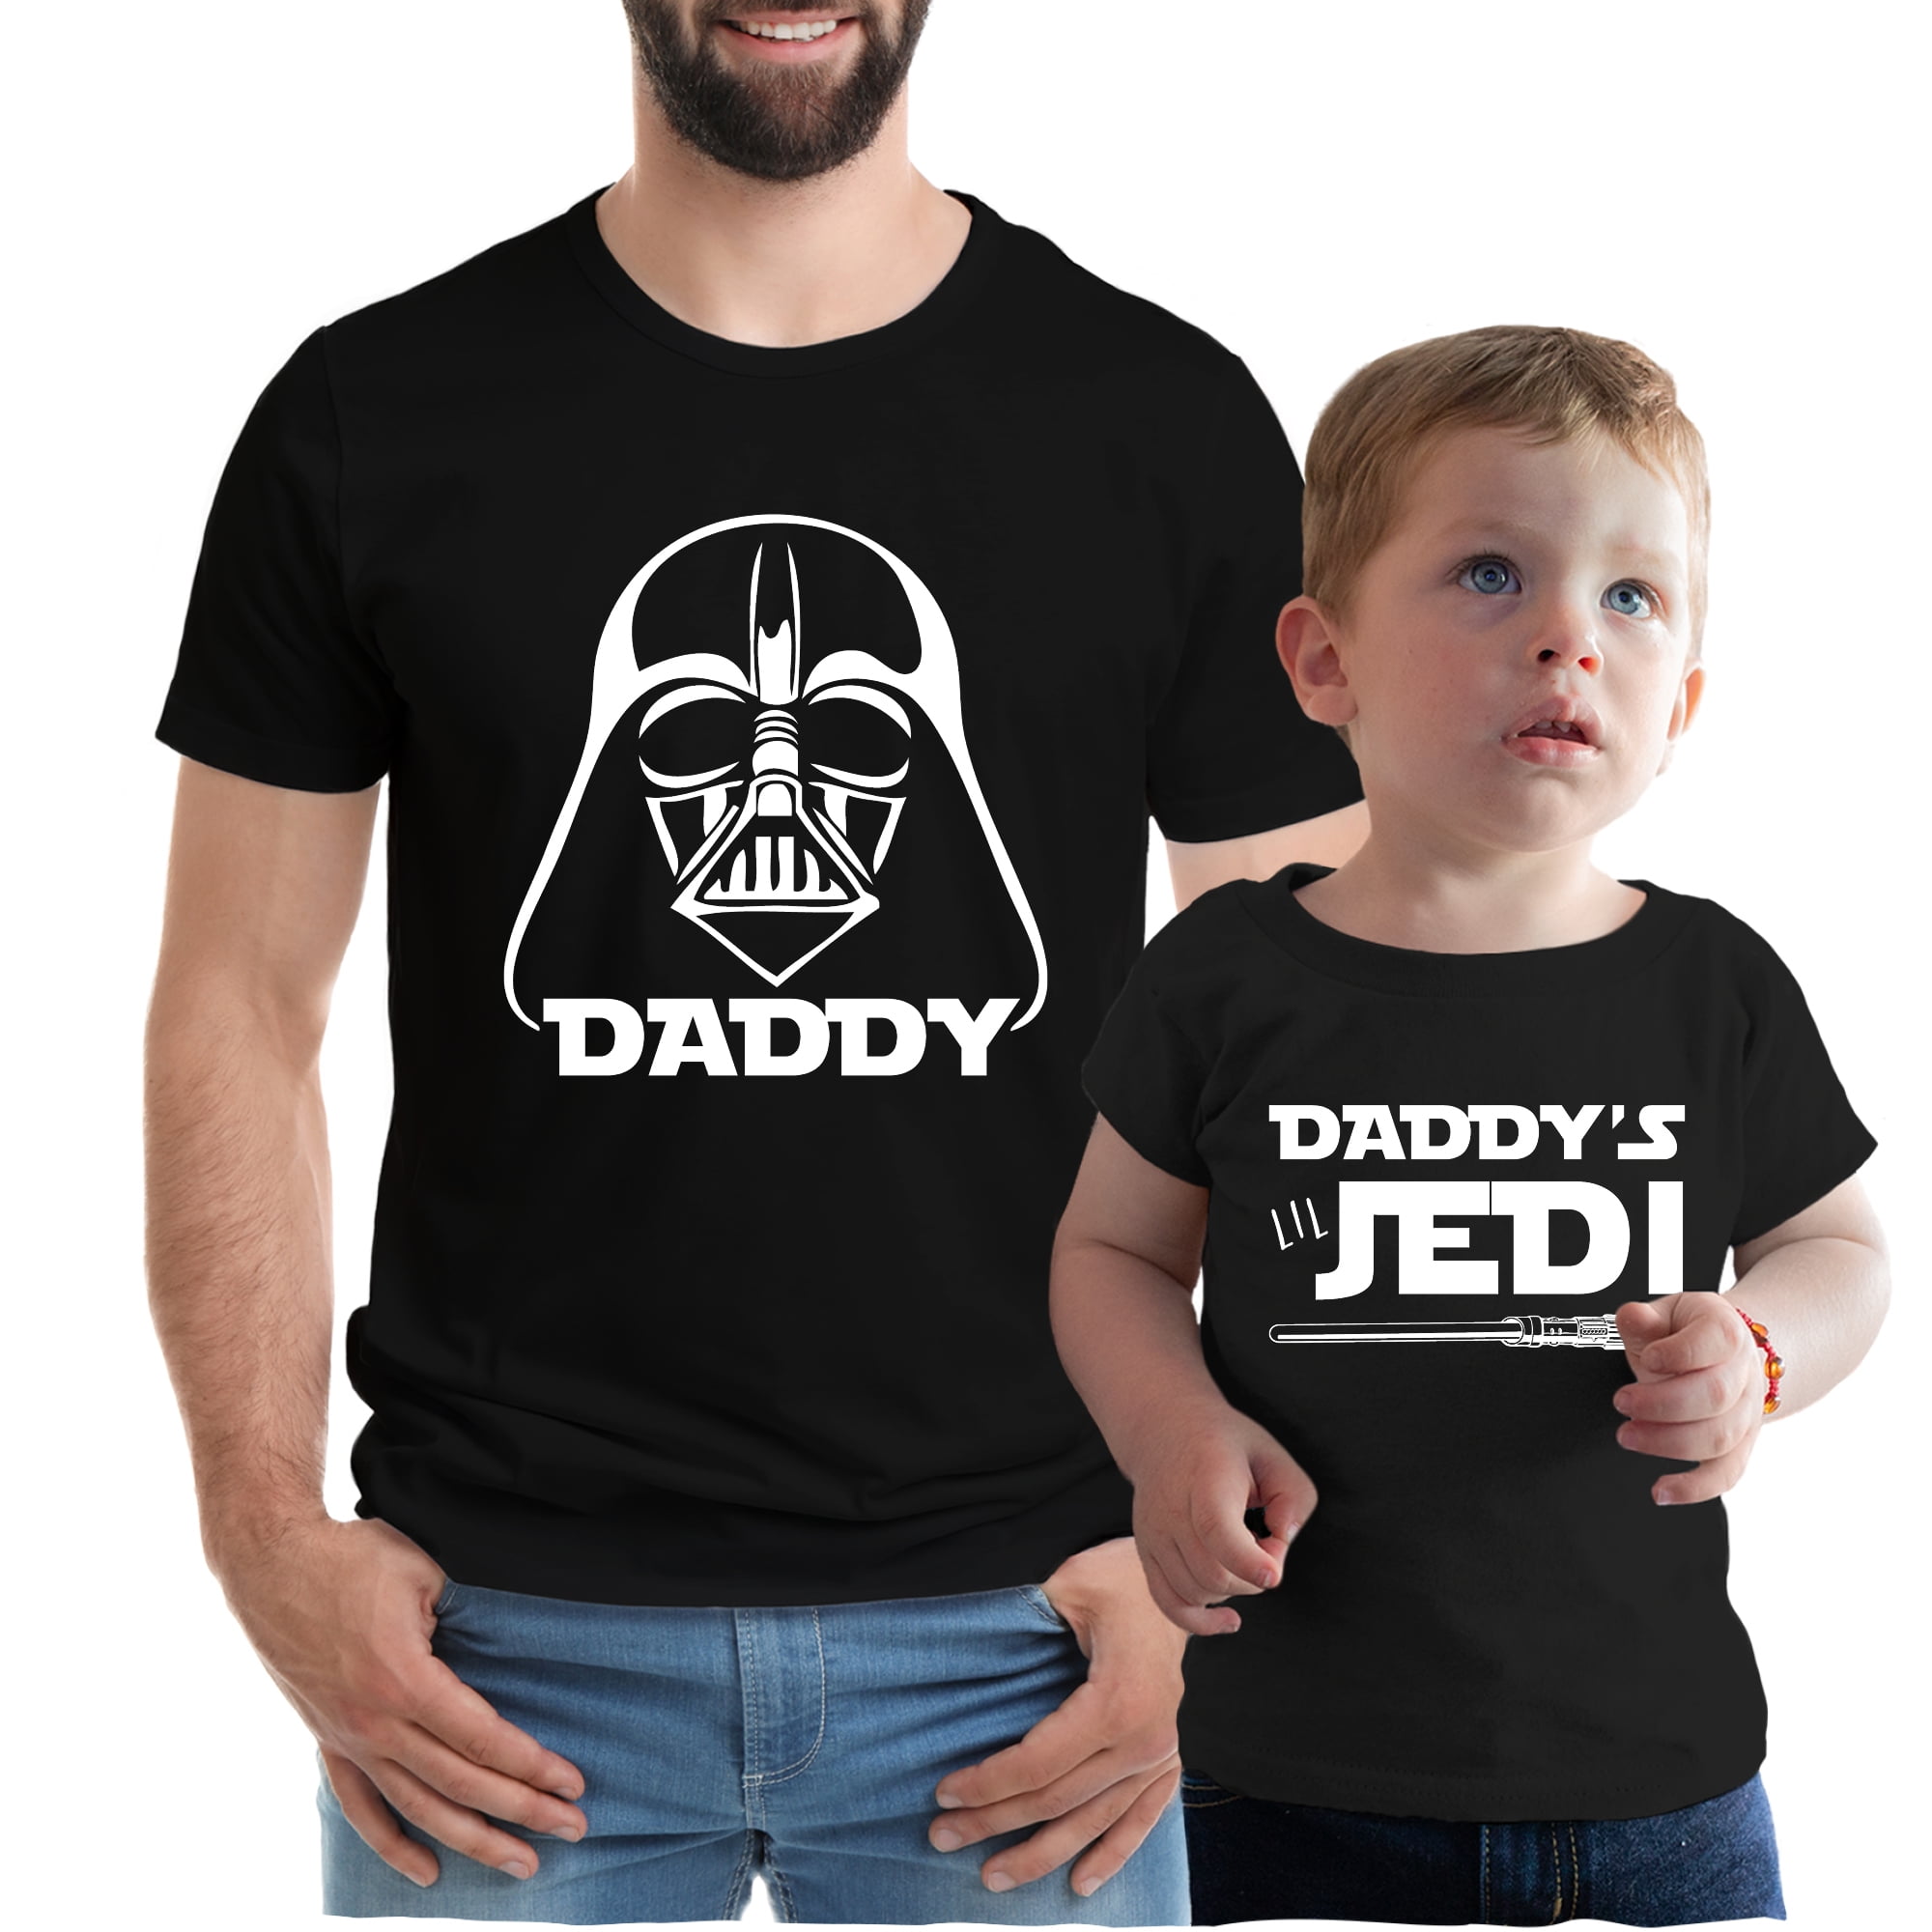 Ilion Clothing Co Star Wars Toddler I Am Your Son T-Shirt